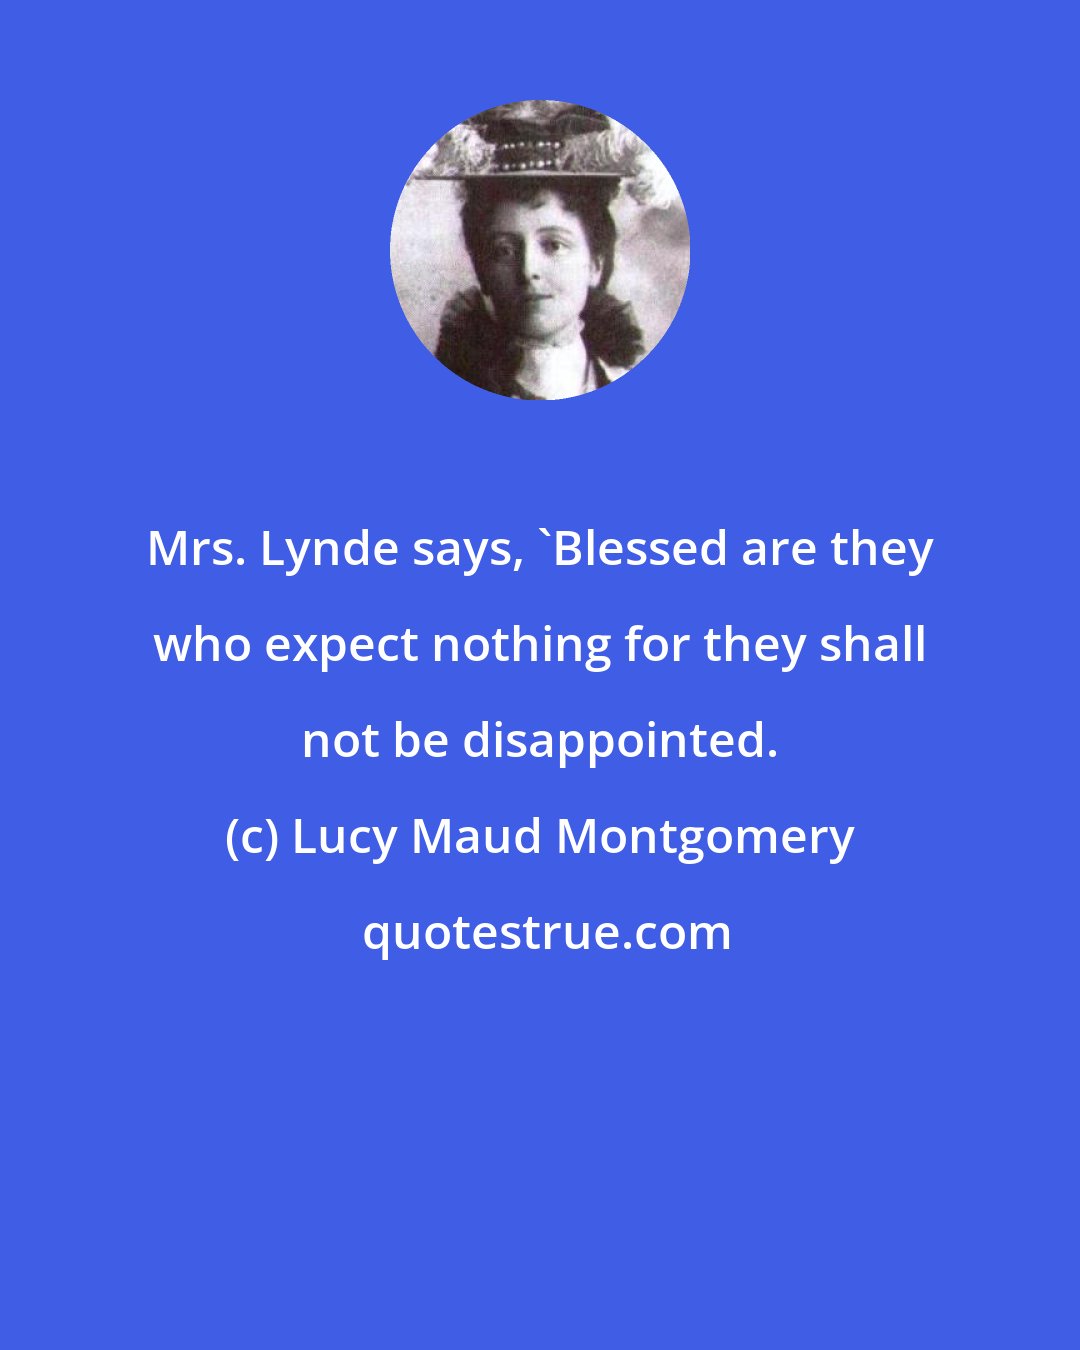 Lucy Maud Montgomery: Mrs. Lynde says, 'Blessed are they who expect nothing for they shall not be disappointed.